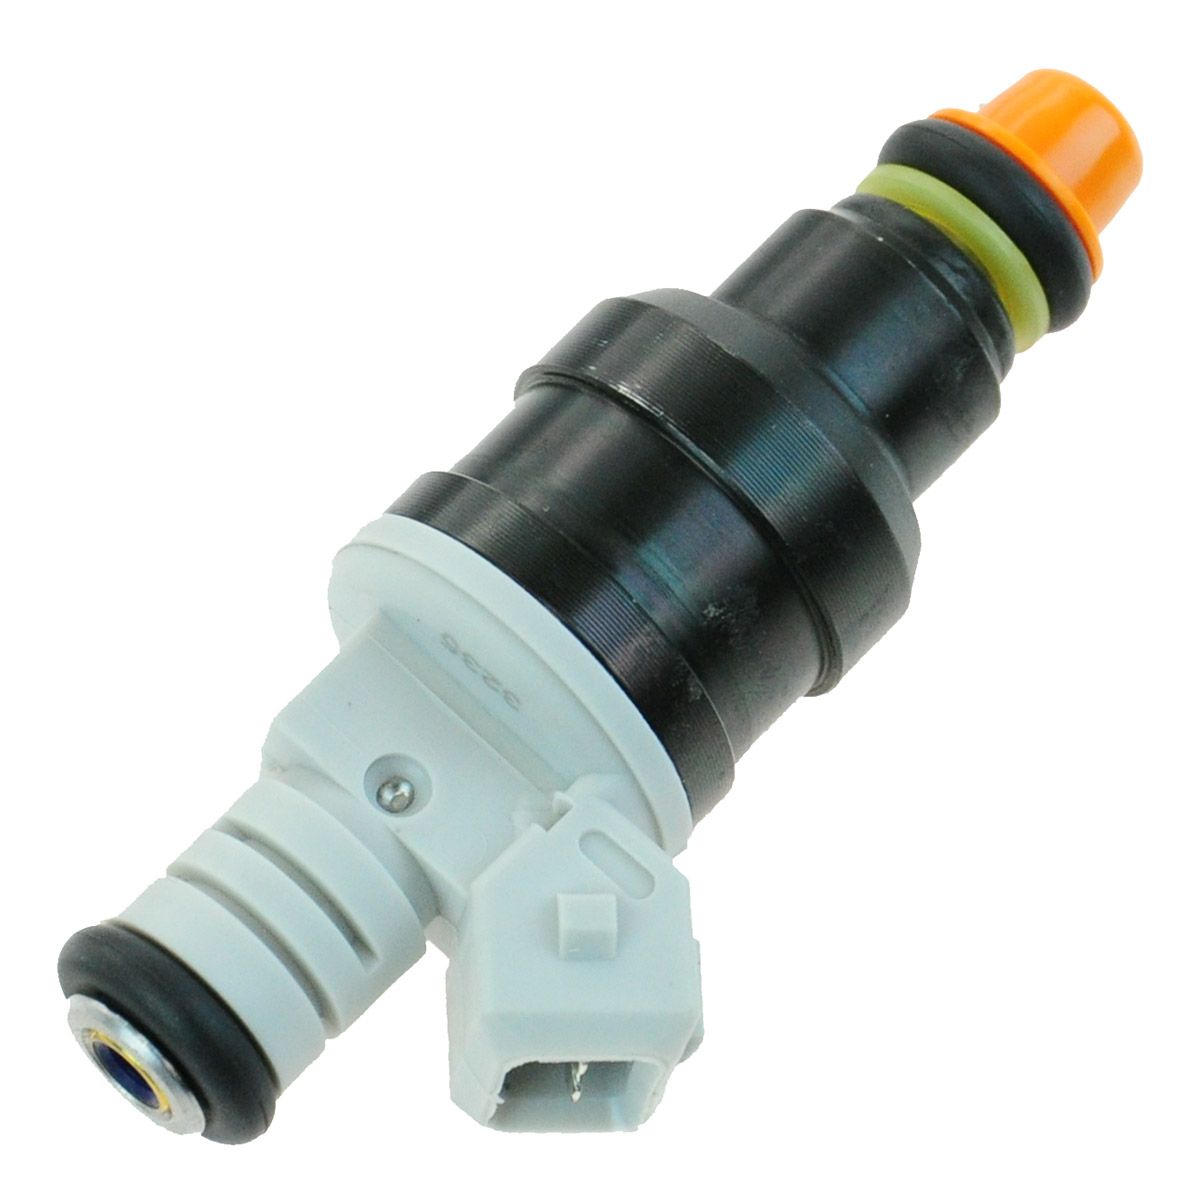 Ford probe fuel injector #7